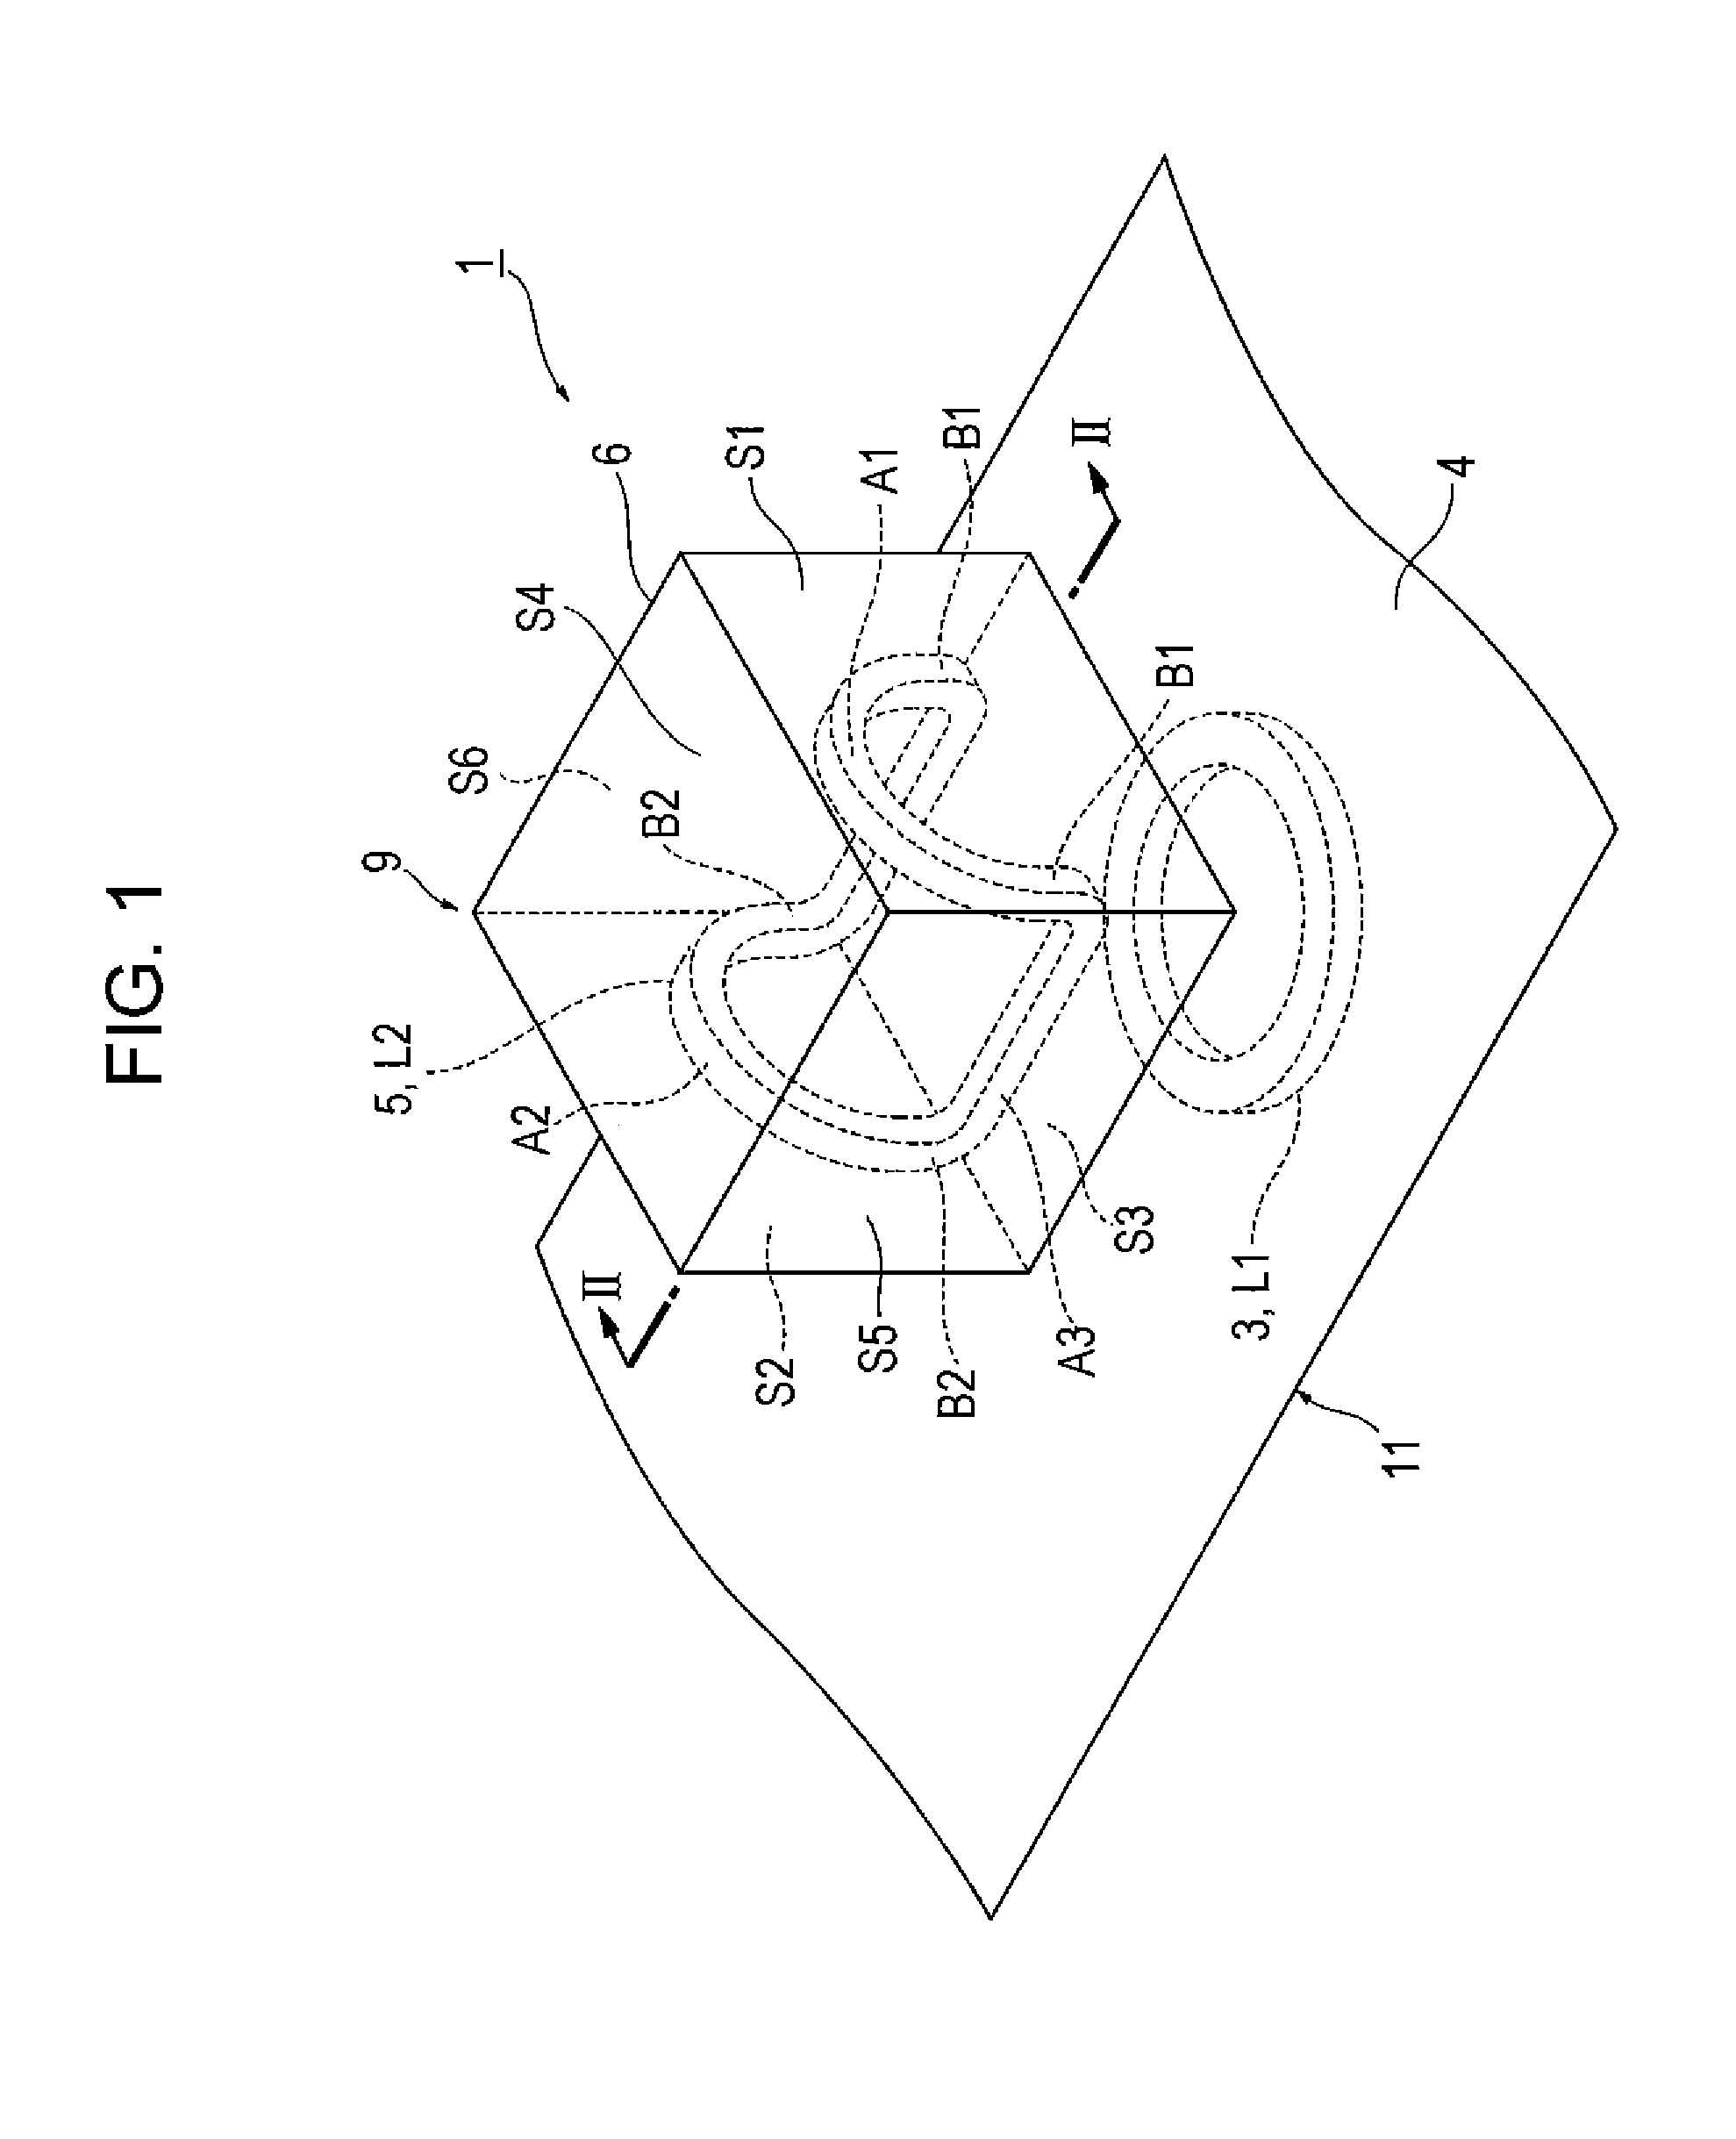 Power feeding device, power receiving device, and wireless power transmission device